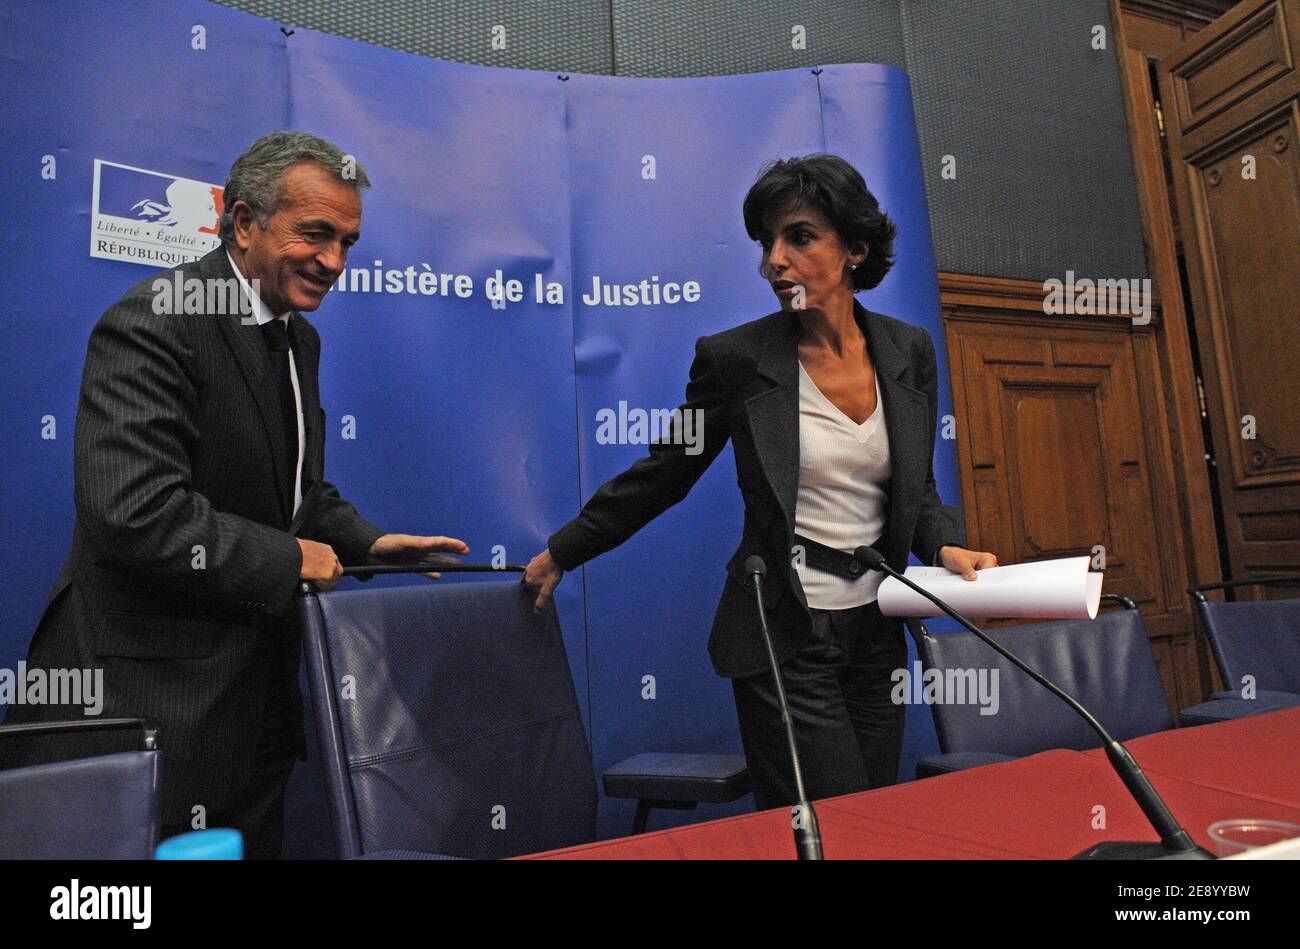 France's Minister of Justice Rachida Dati holds a press conference with First President of the Paris Court law, Jean-Claude Magendie at the Paris Court law in Paris, France, on October 29, 2007. Photo by Christophe Guibbaud/ABACAPRESS.COM Stock Photo